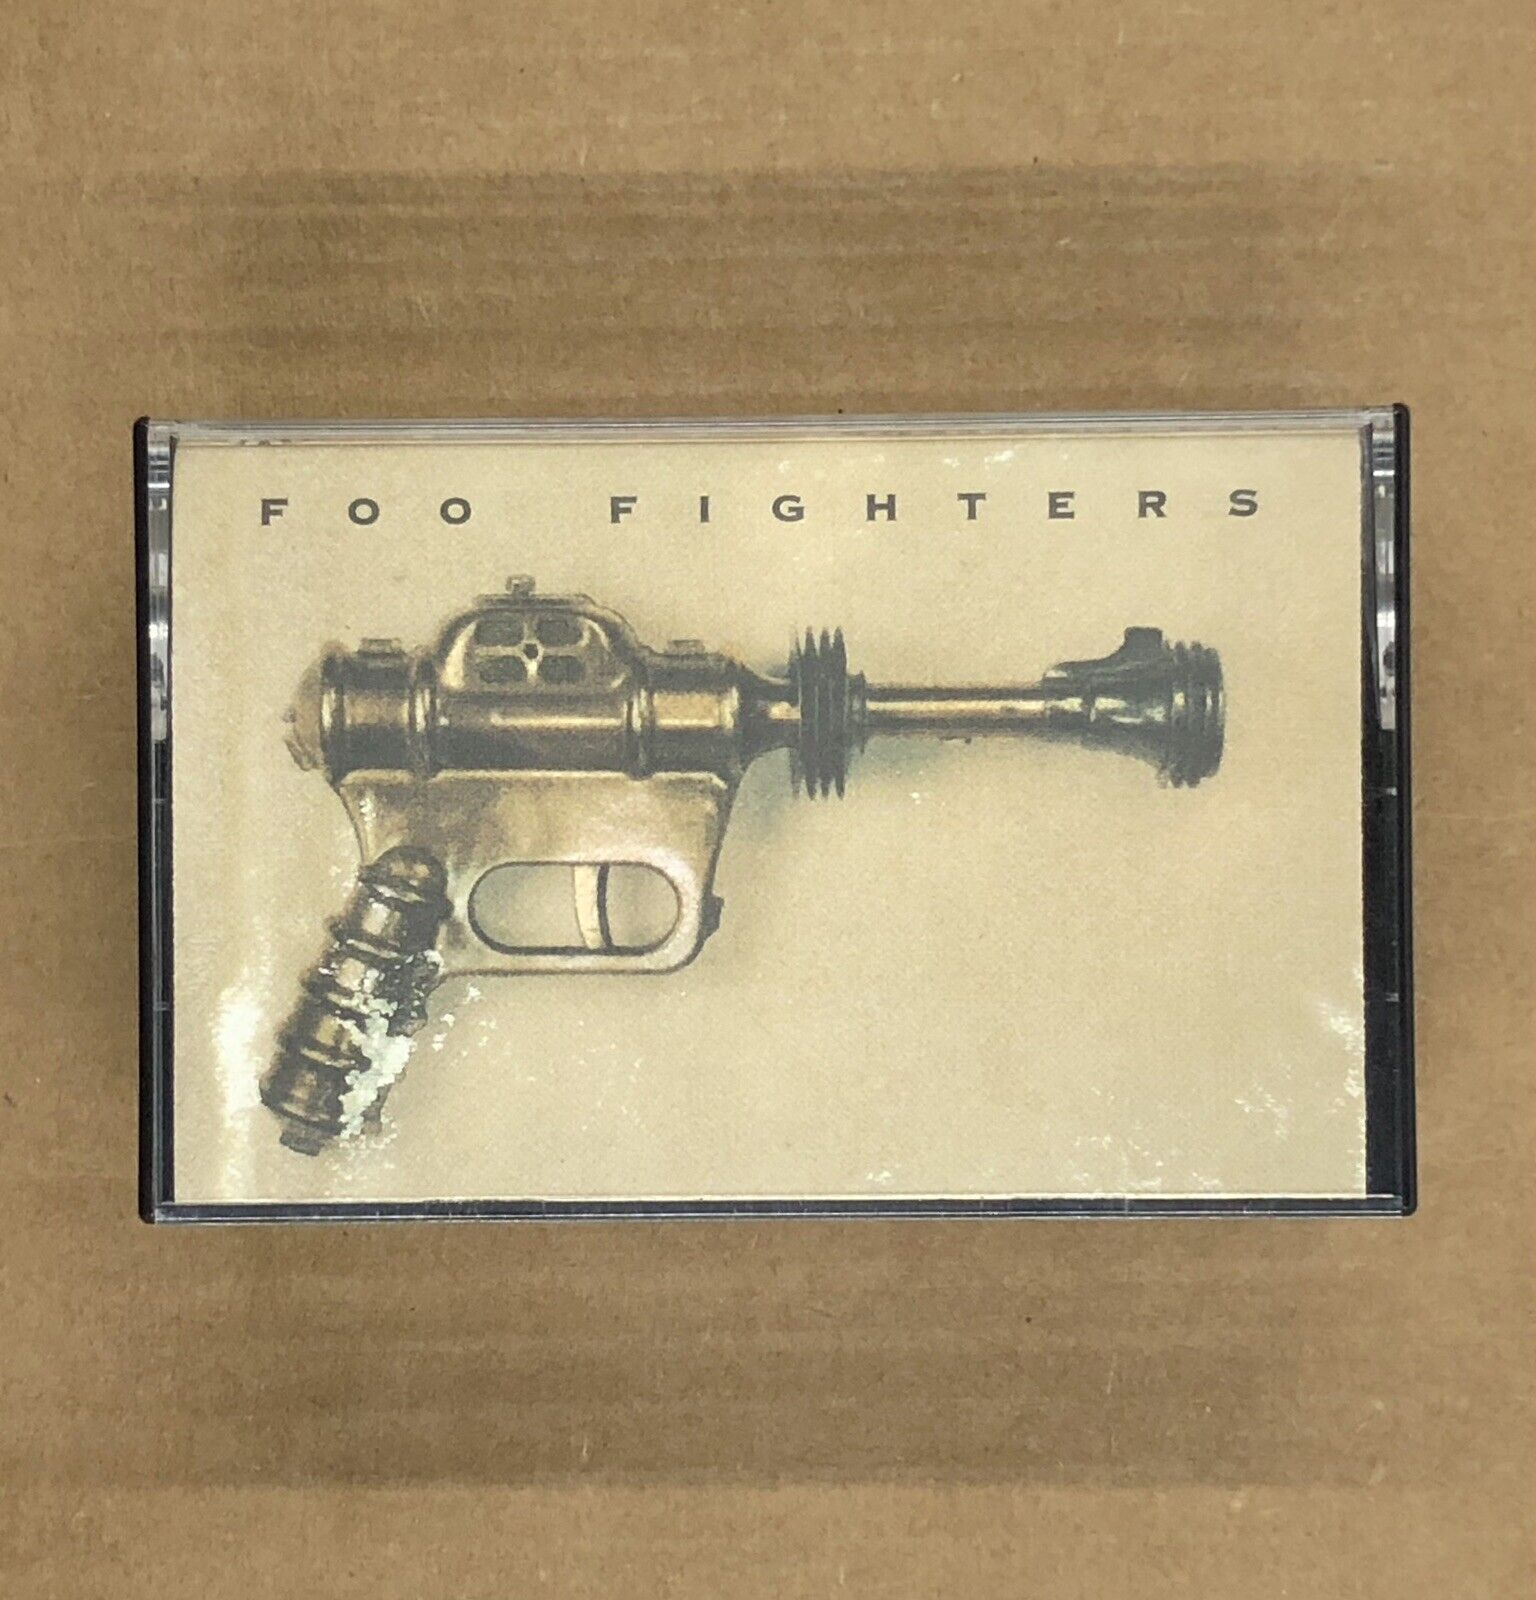 FOO FIGHTERS Cassette Tape DAVE GROHL 1995 90s Rock Grunge THIS IS A CALL BIG ME